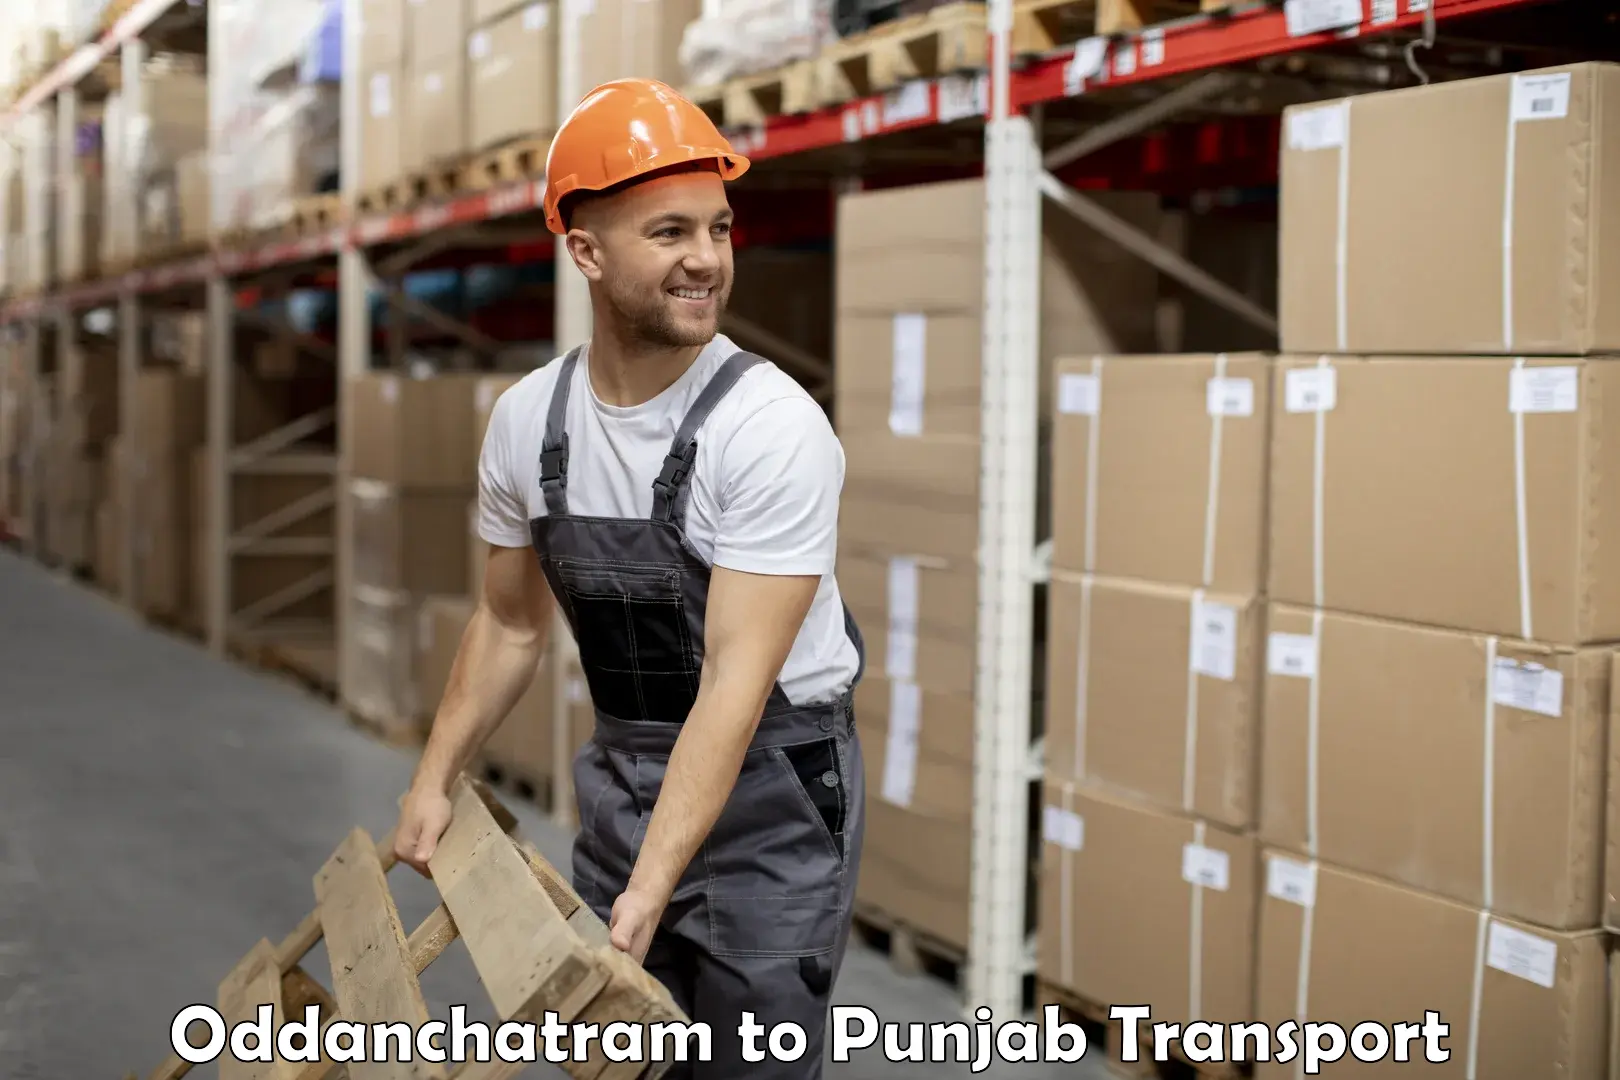 Container transportation services Oddanchatram to Sirhind Fatehgarh